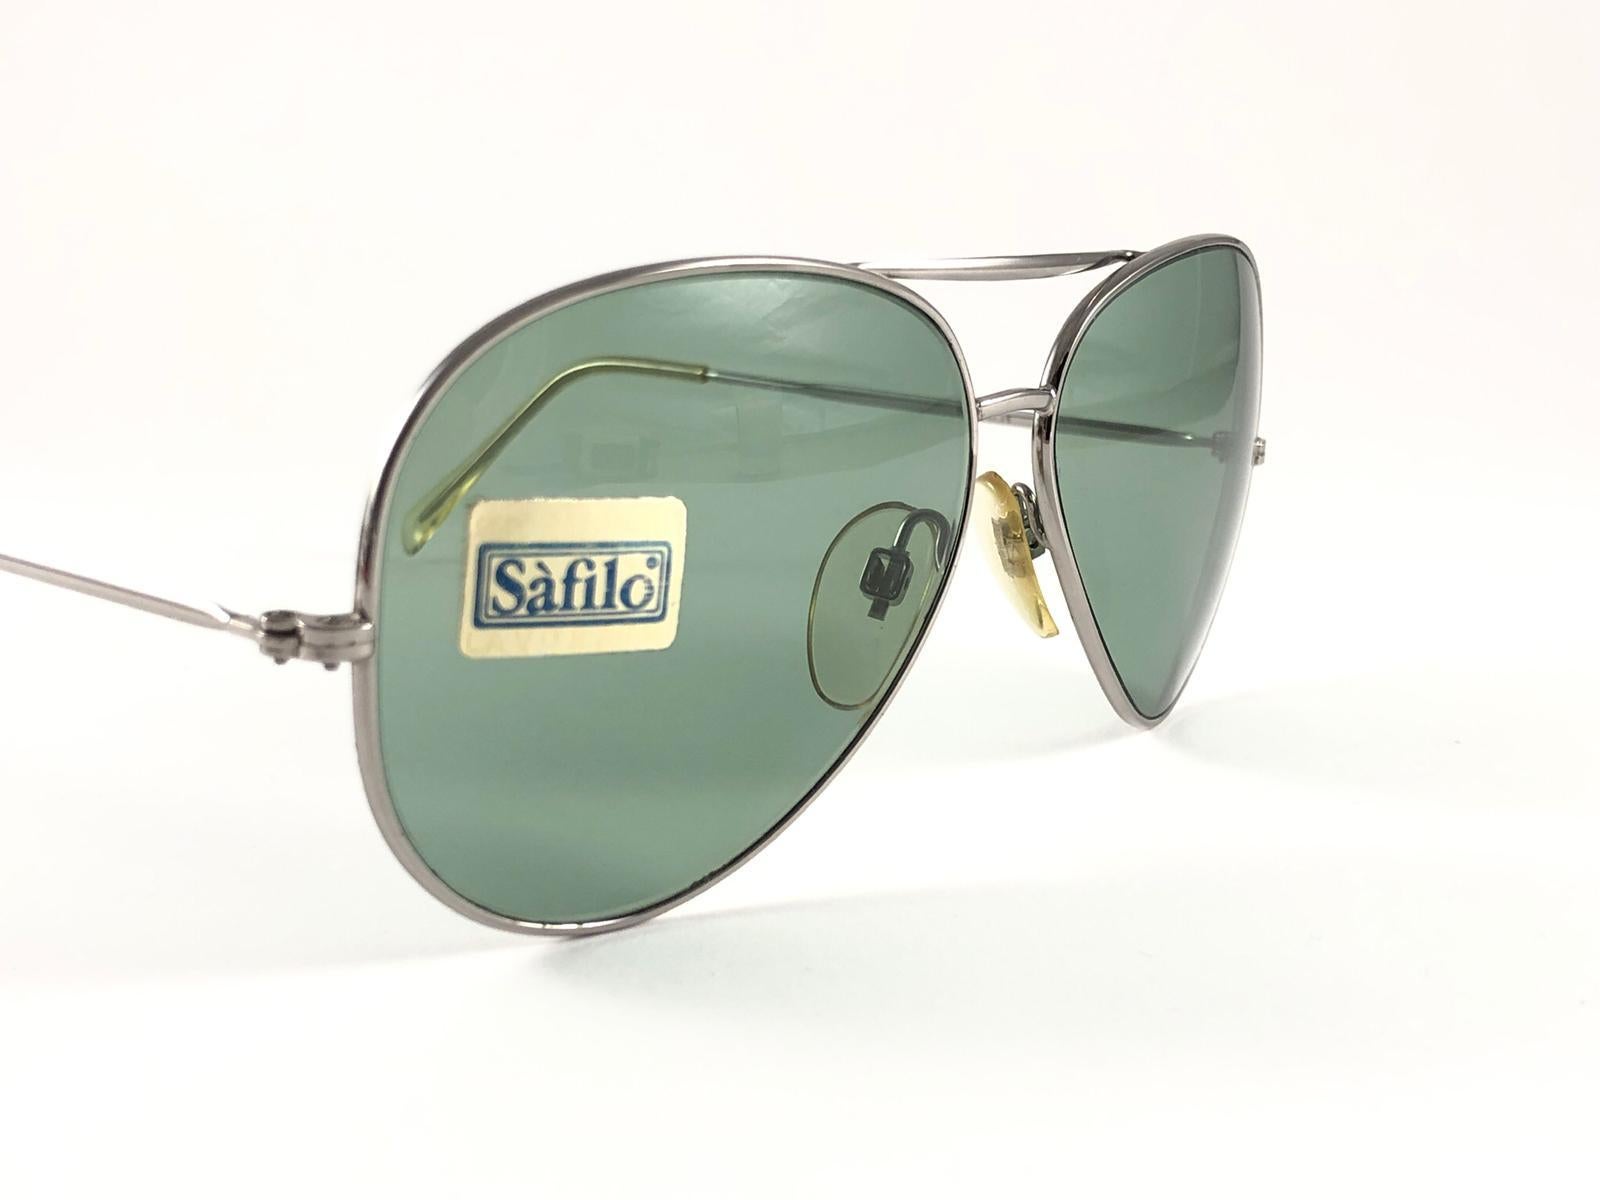 New Vintage Safilo Jet Silver Aviator Frame 1980's Sunglasses Made in Italy In New Condition For Sale In Baleares, Baleares